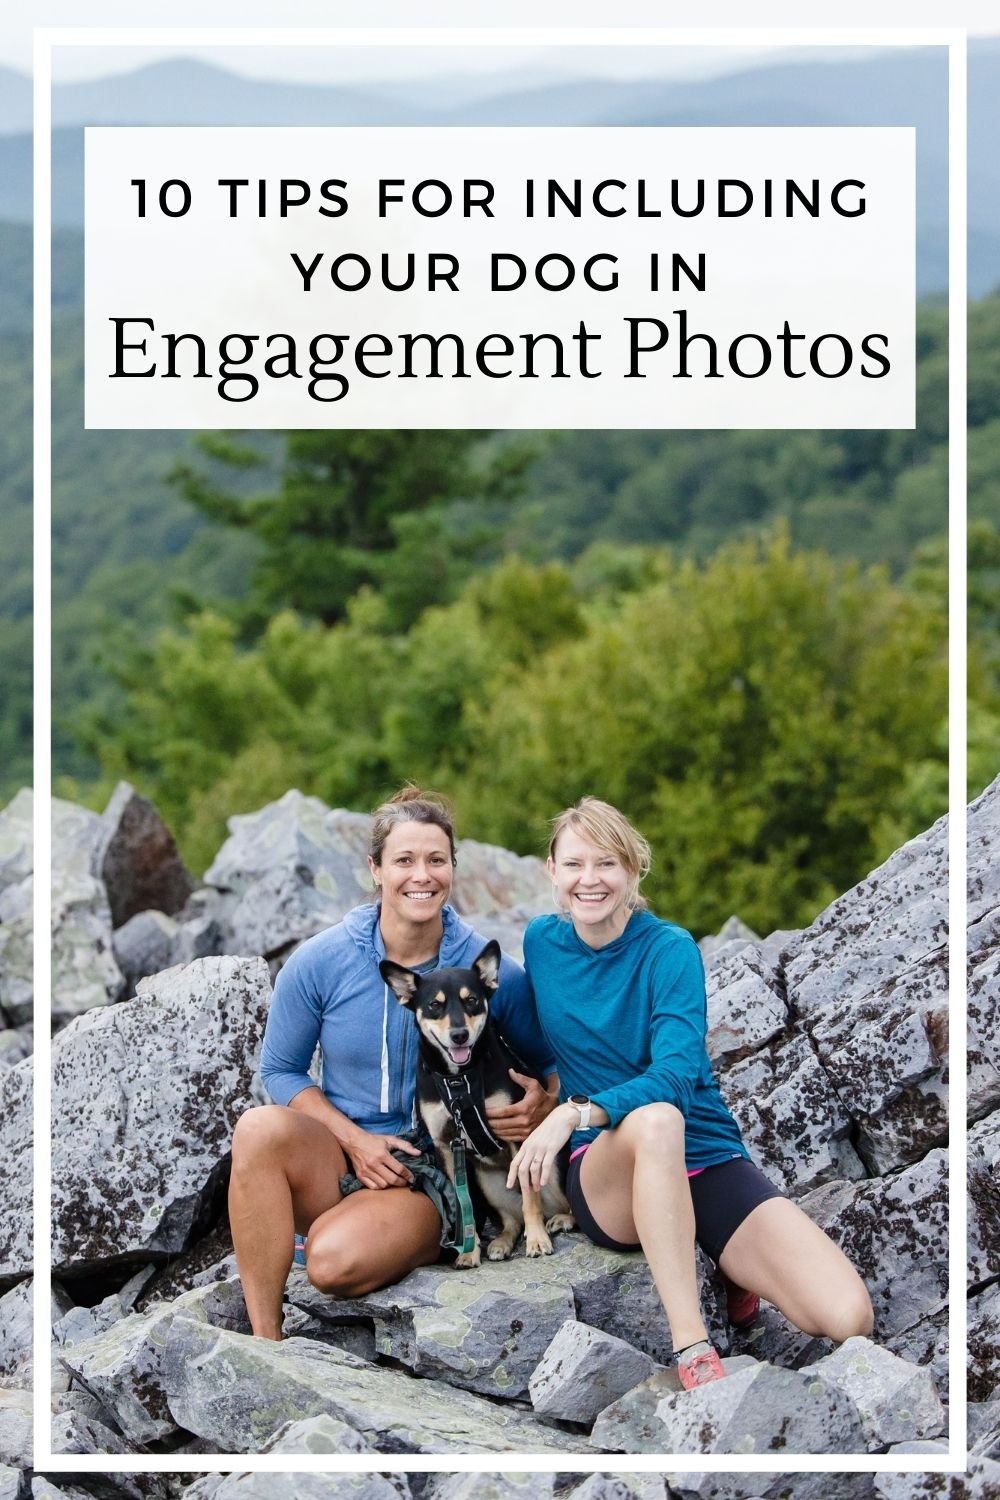 Tips to include your dog in engagement photos